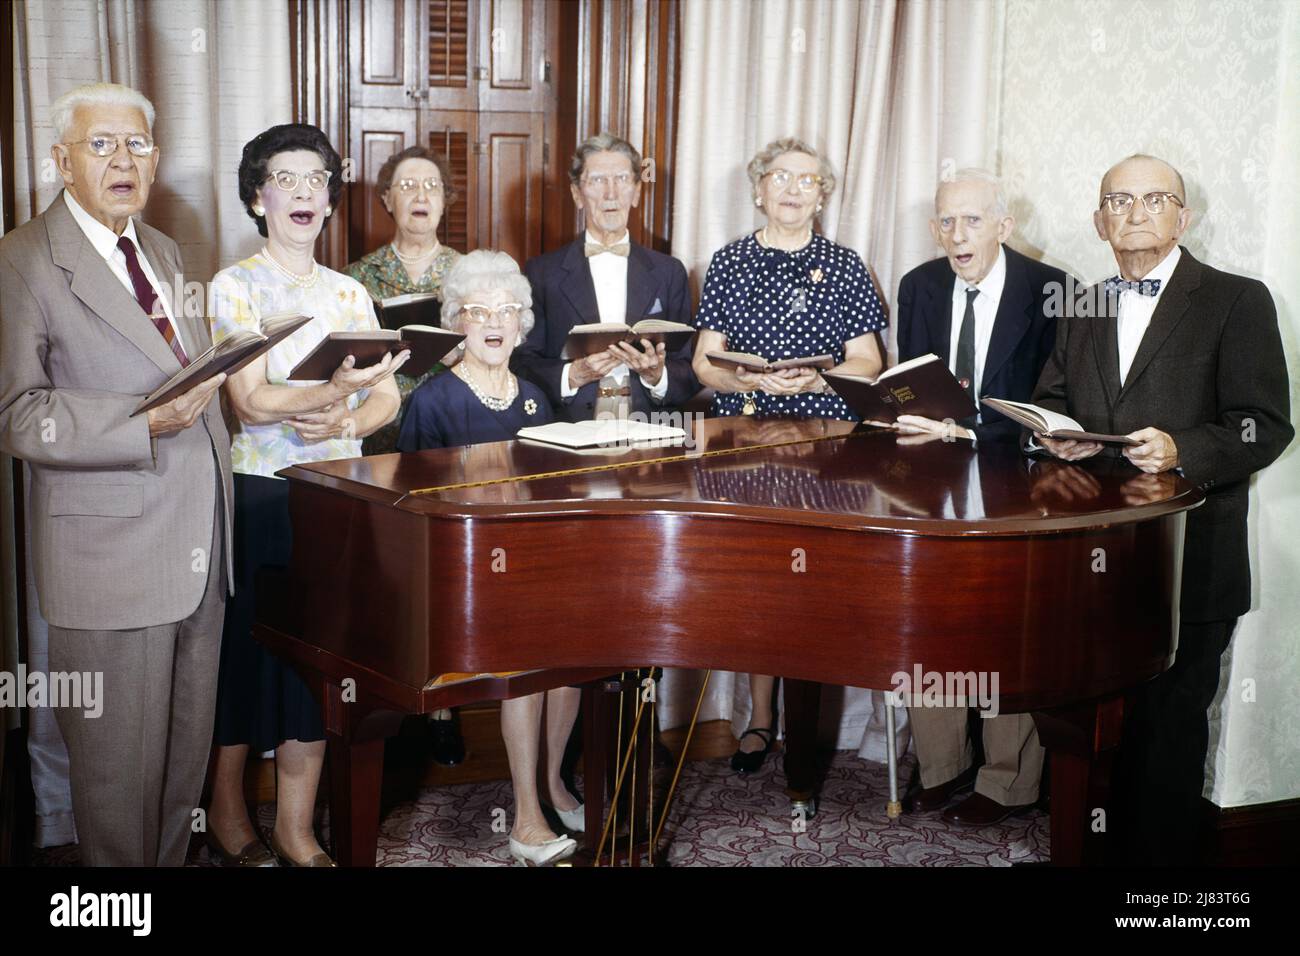 1960s GROUP OF 8 SENIOR CITIZENS MEN AND WOMEN STANDING AROUND PIANO HOLDING HYMNALS SINGING - km1278 HAR001 HARS RELIGION ELDER FEMALES HOME LIFE COPY SPACE FRIENDSHIP HALF-LENGTH LADIES PERSONS INSPIRATION MALES RETIREMENT ENTERTAINMENT SPIRITUALITY CONFIDENCE SENIOR MAN SENIOR ADULT EYE CONTACT SENIOR WOMAN RETIREE ACTIVITY 8 OLD AGE OLDSTERS OLDSTER LEISURE AND AGING RECREATION SONG VOCAL PRIDE OPPORTUNITY ENTERTAINER HOMES ELDERS MUSICAL INSTRUMENT CONNECTION VOCALIZE VOCALS RESIDENCE SENIOR CITIZENS SONGS ELDERLY MAN ASSISTED LIVING COOPERATION ELDERLY WOMAN TOGETHERNESS Stock Photo